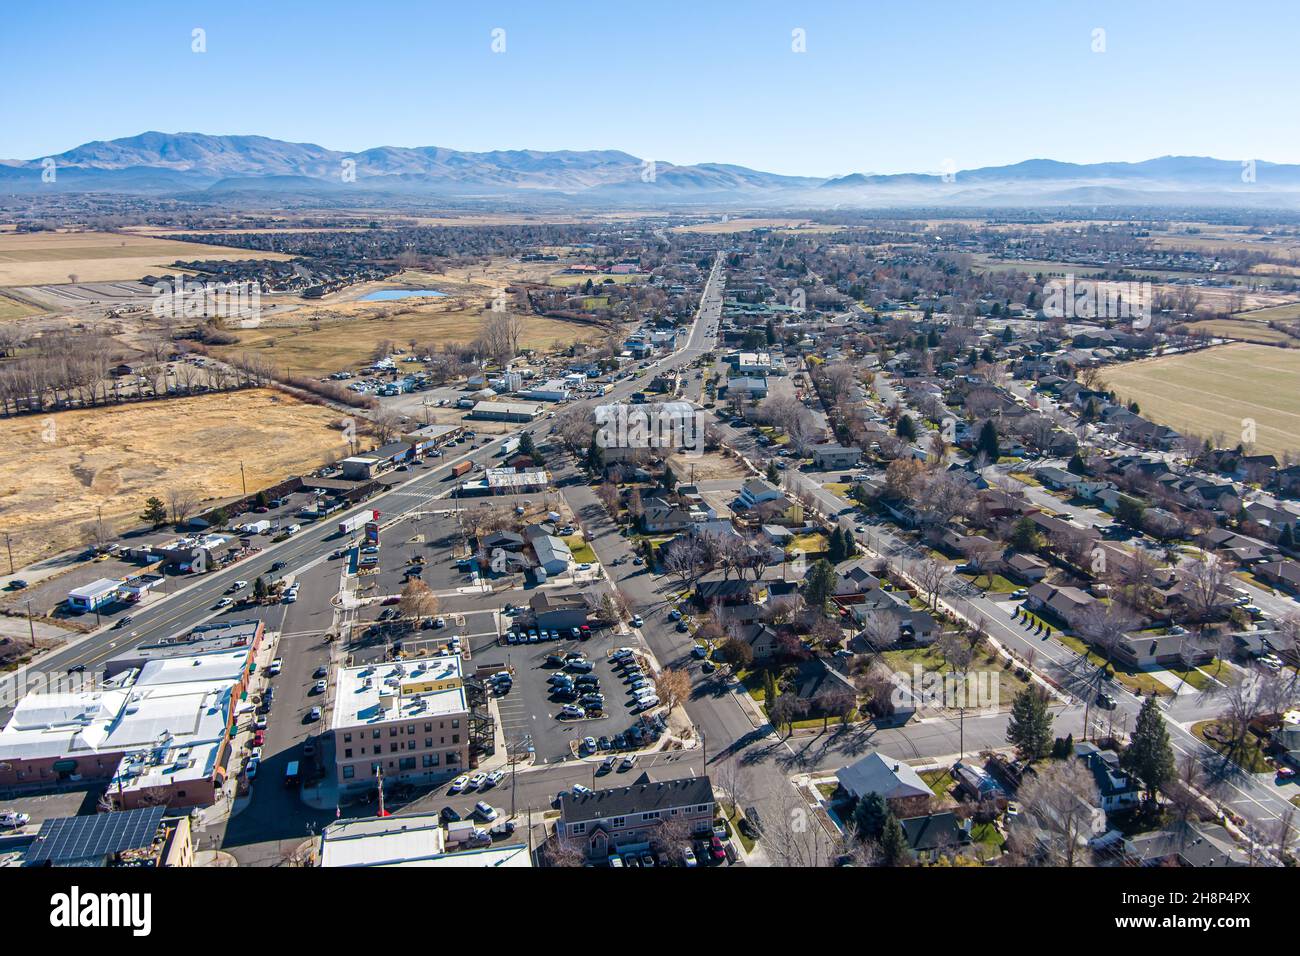 Minden, Nevada - USA - November 29, 2021: Aerial view of Minden and Gardnerville Nevada along Highway 395 in the Carson Valley. Stock Photo